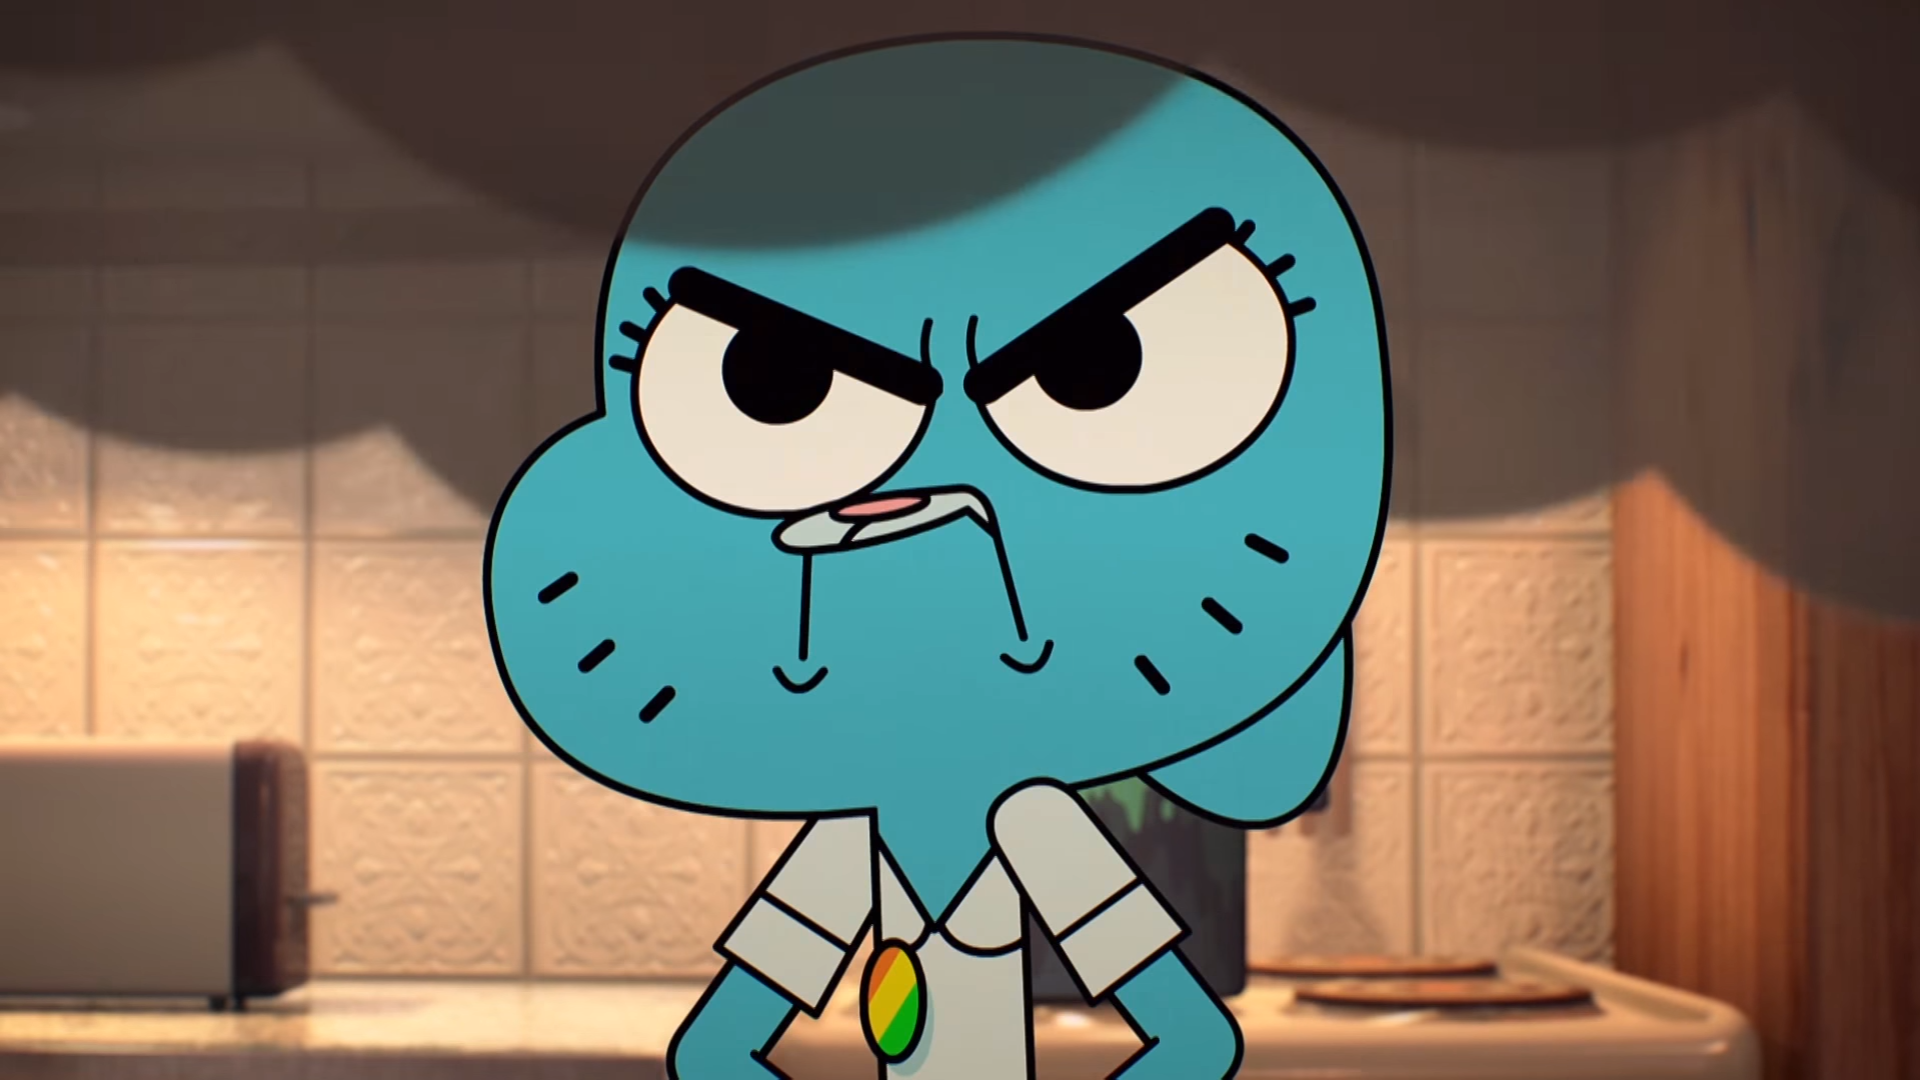 Blue Hair Lady from The Amazing World of Gumball - wide 10